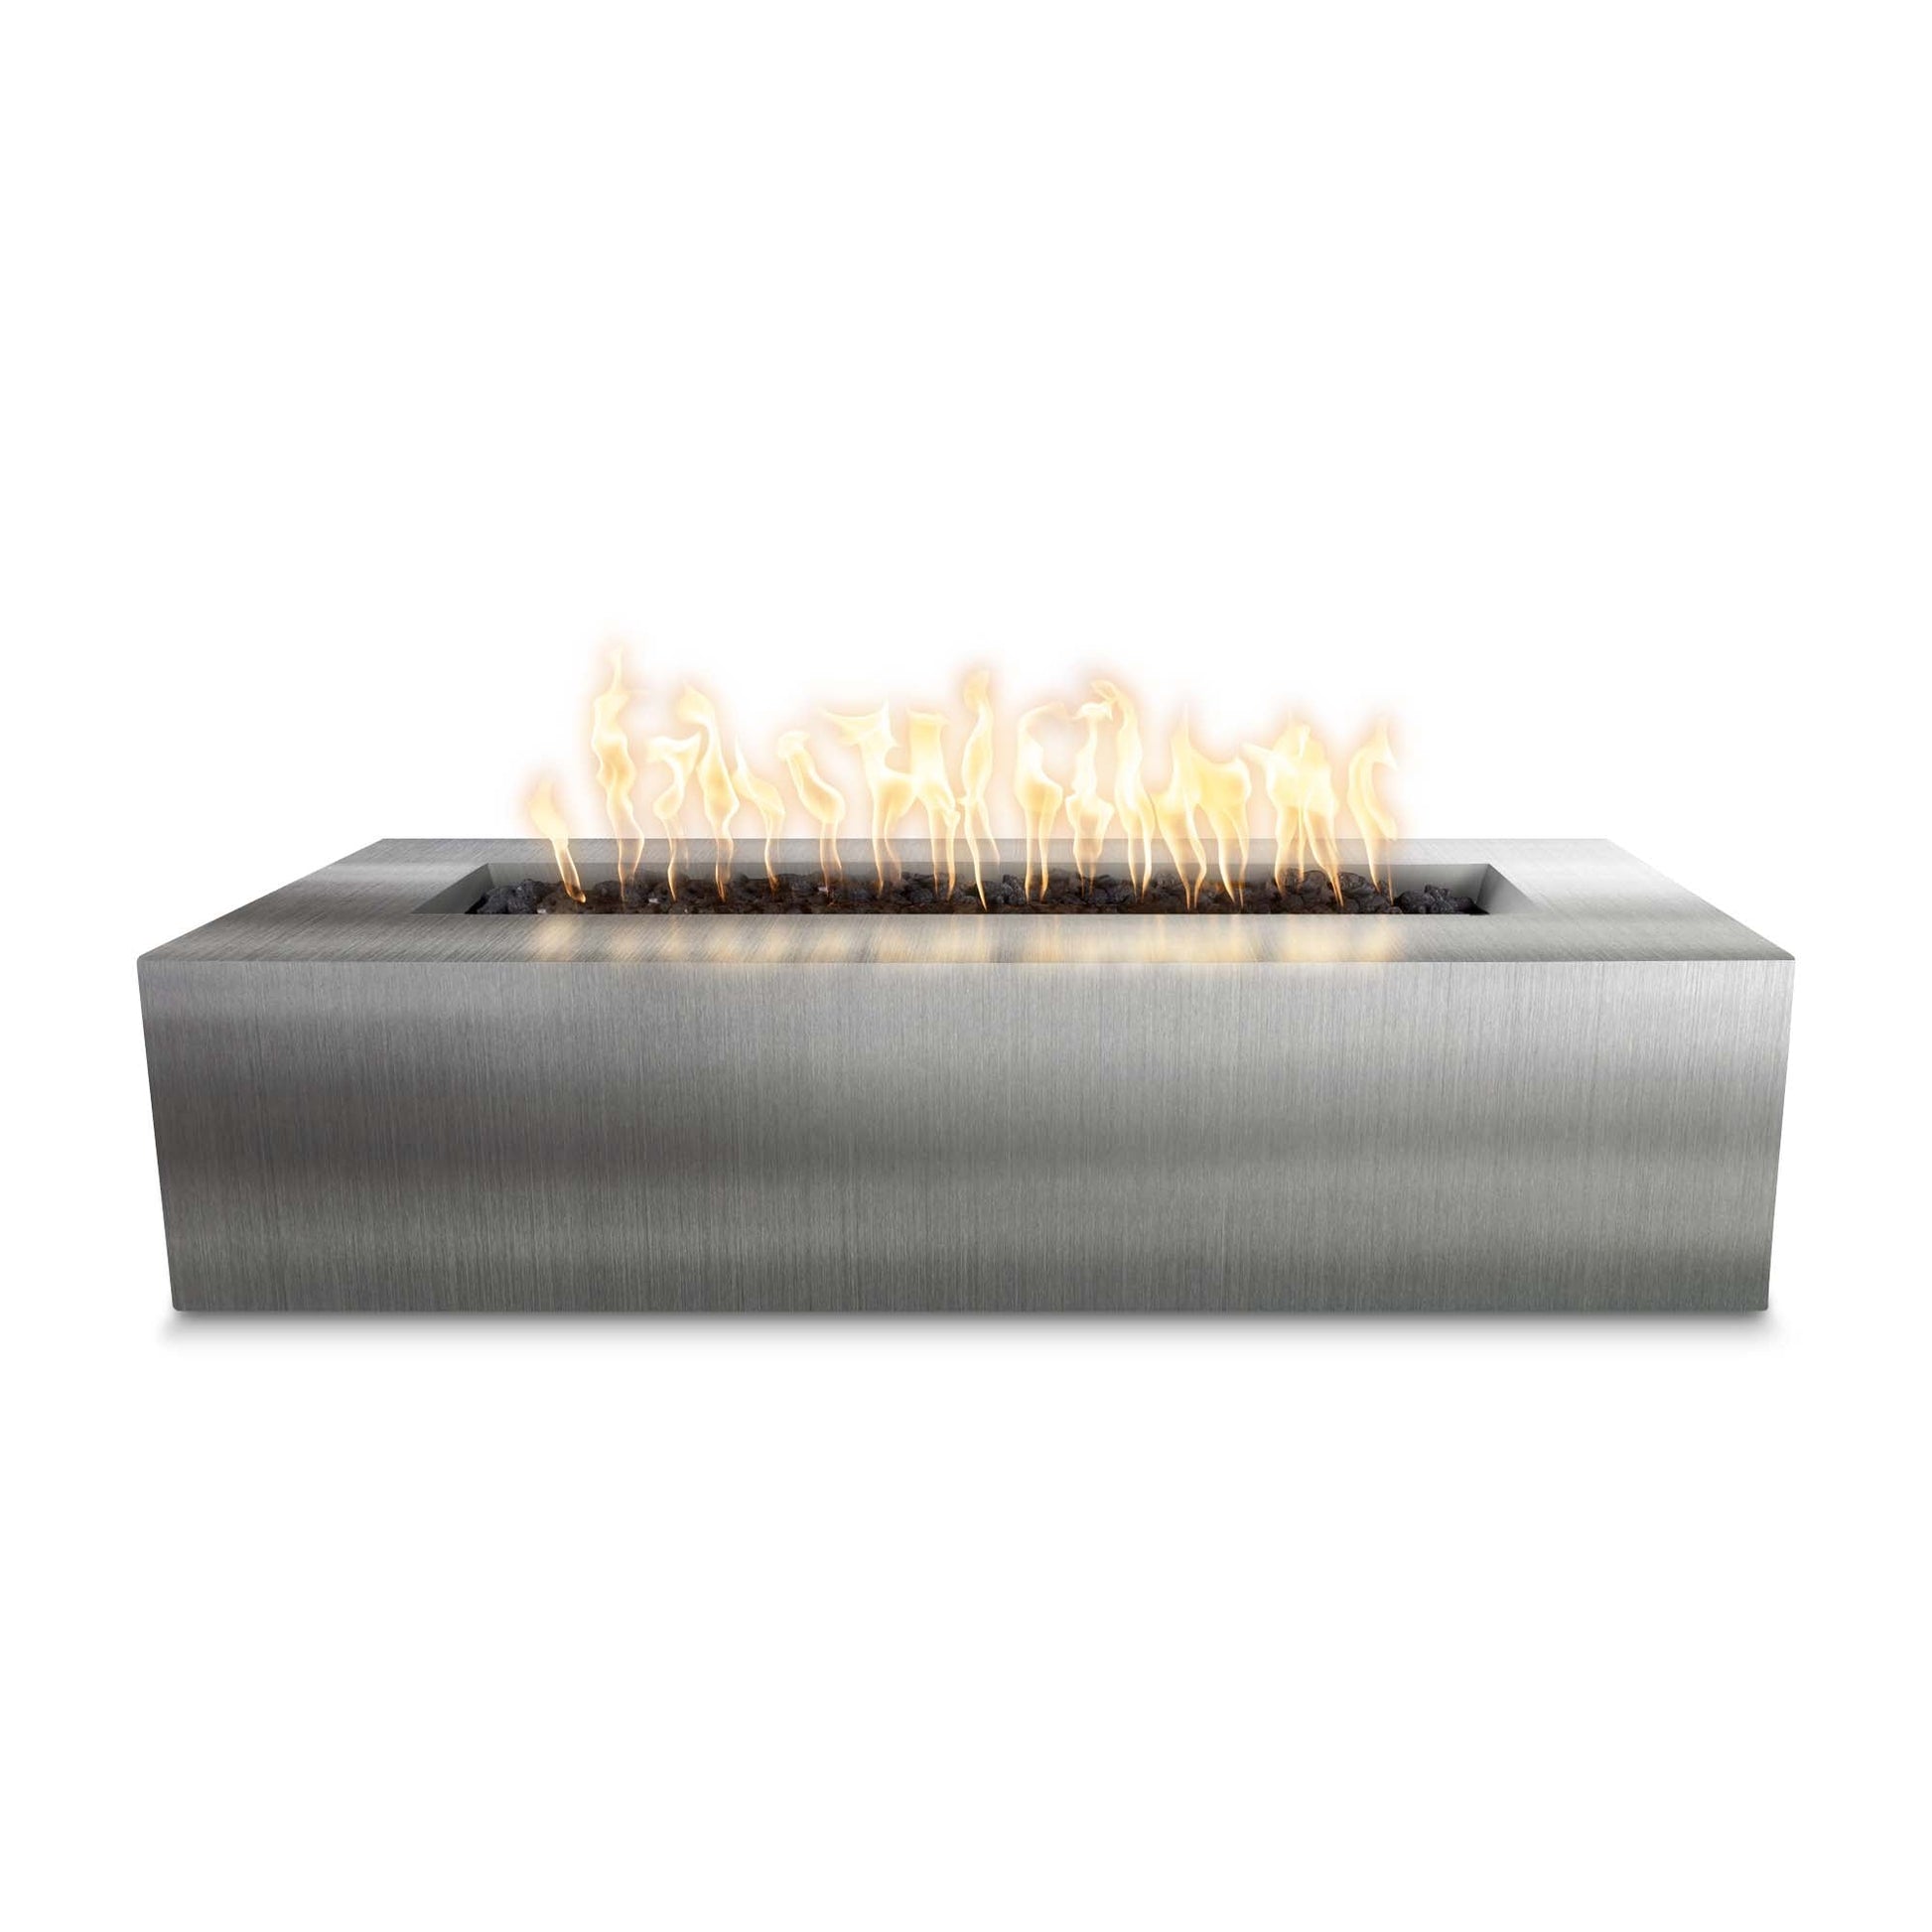 The Outdoor Plus Rectangular Regal 48" Corten Steel Liquid Propane Fire Pit with 110V Electronic Ignition